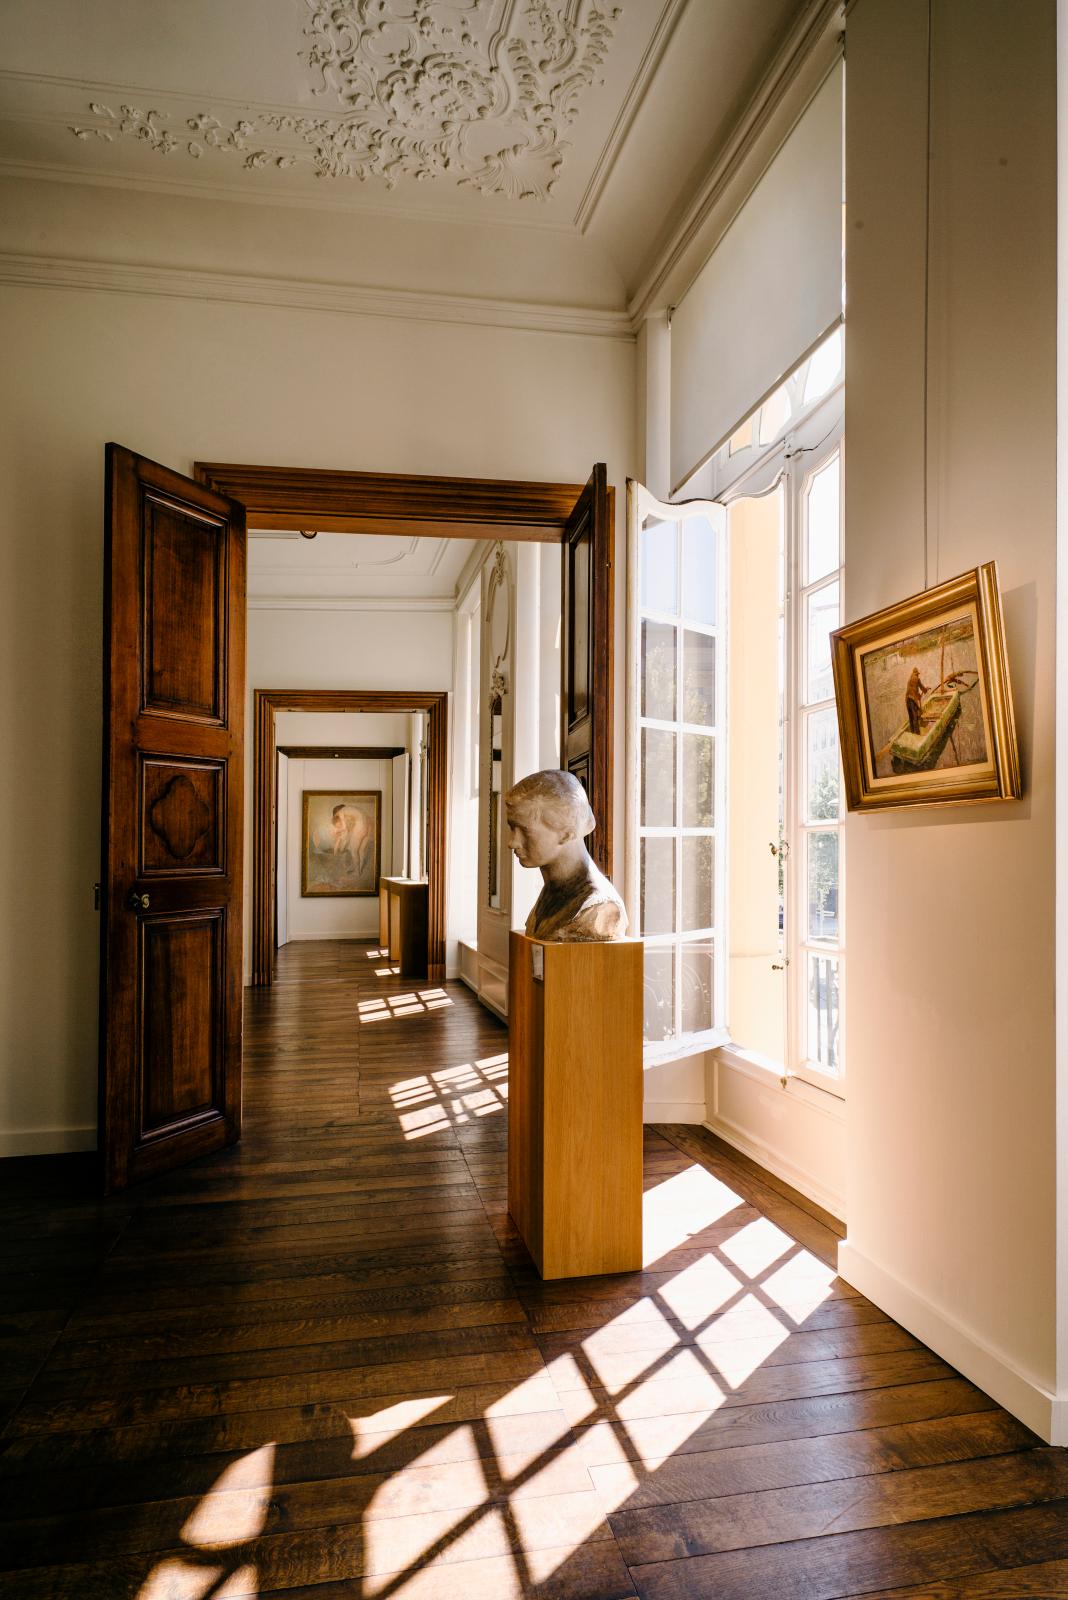 View of the series of exhibition rooms at the Ghent gallery.